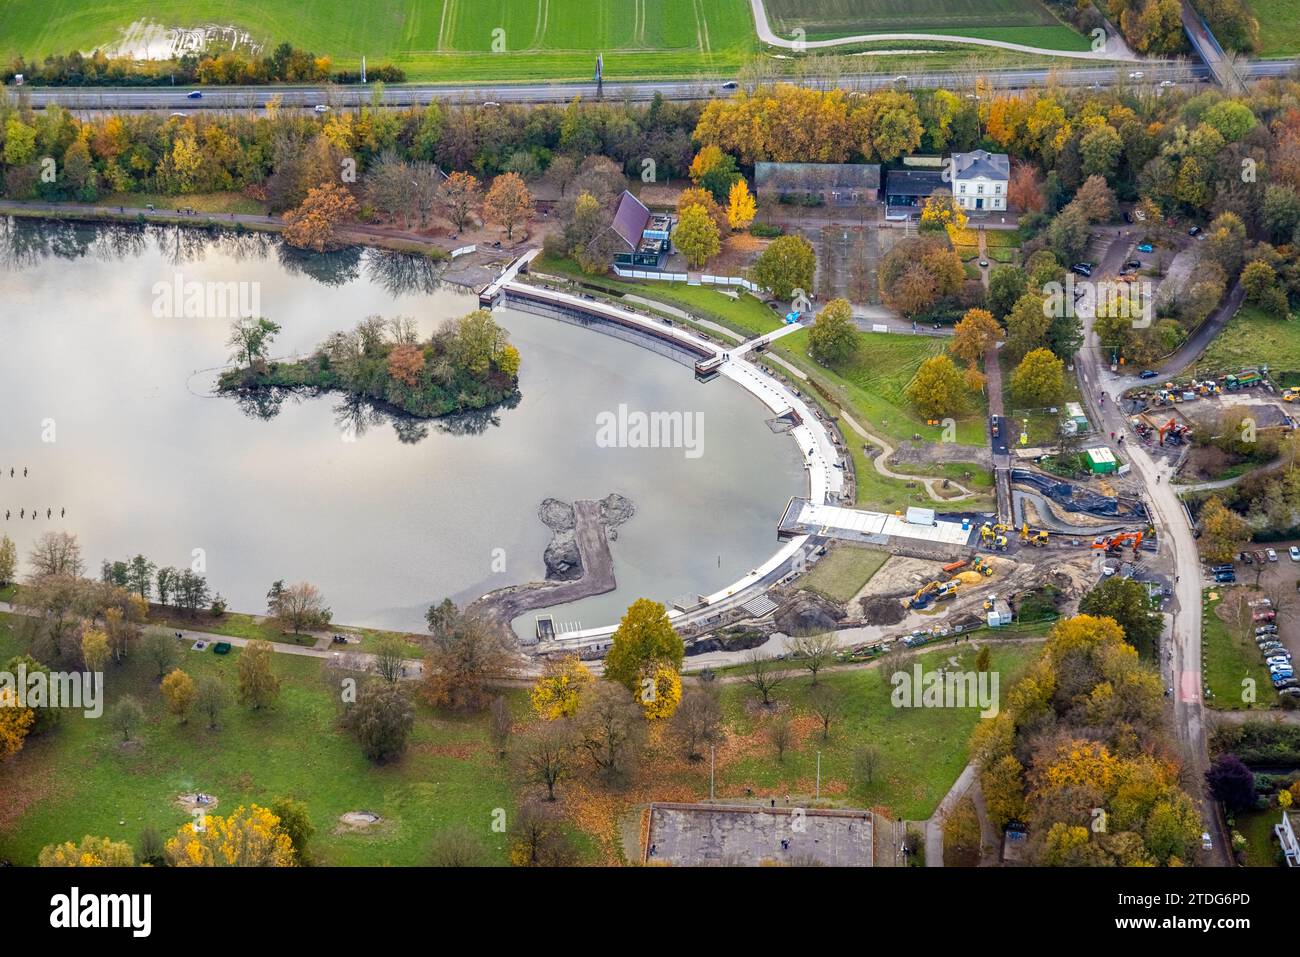 Aerial view, Ümminger See recreation area, construction site with construction measures for flood protection and renaturation Harpener Bach, bird prot Stock Photo